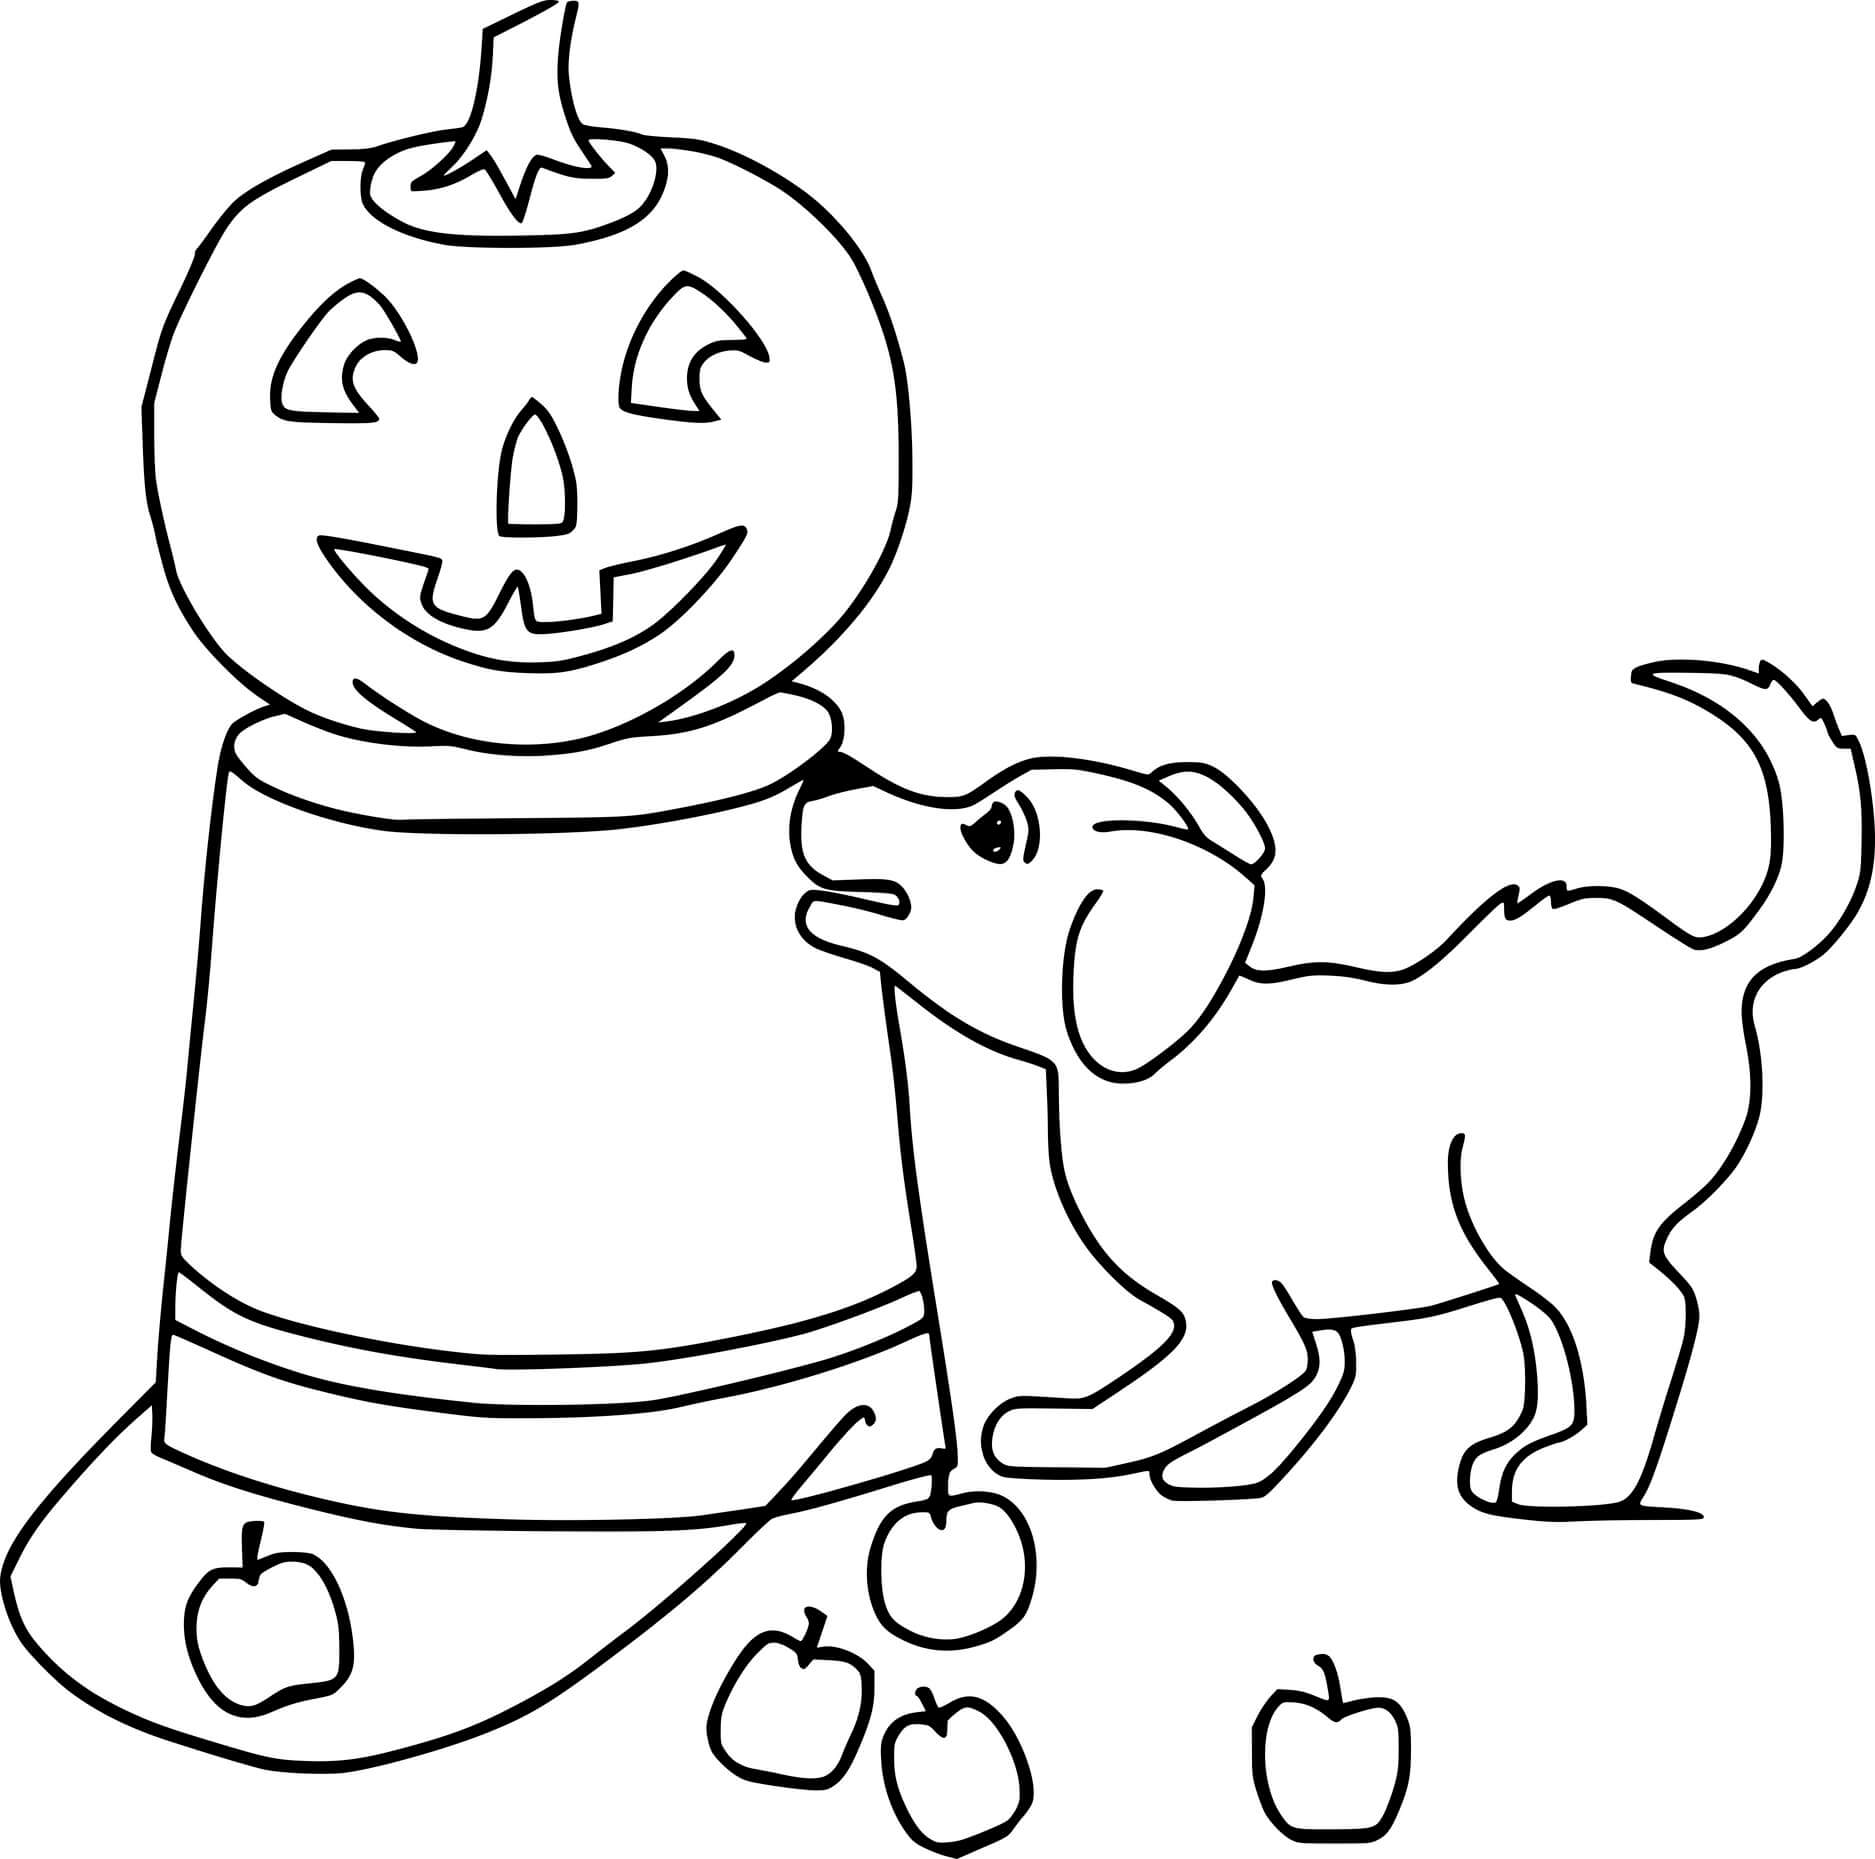 Jack O Lantern On The Bucket With A Puppy